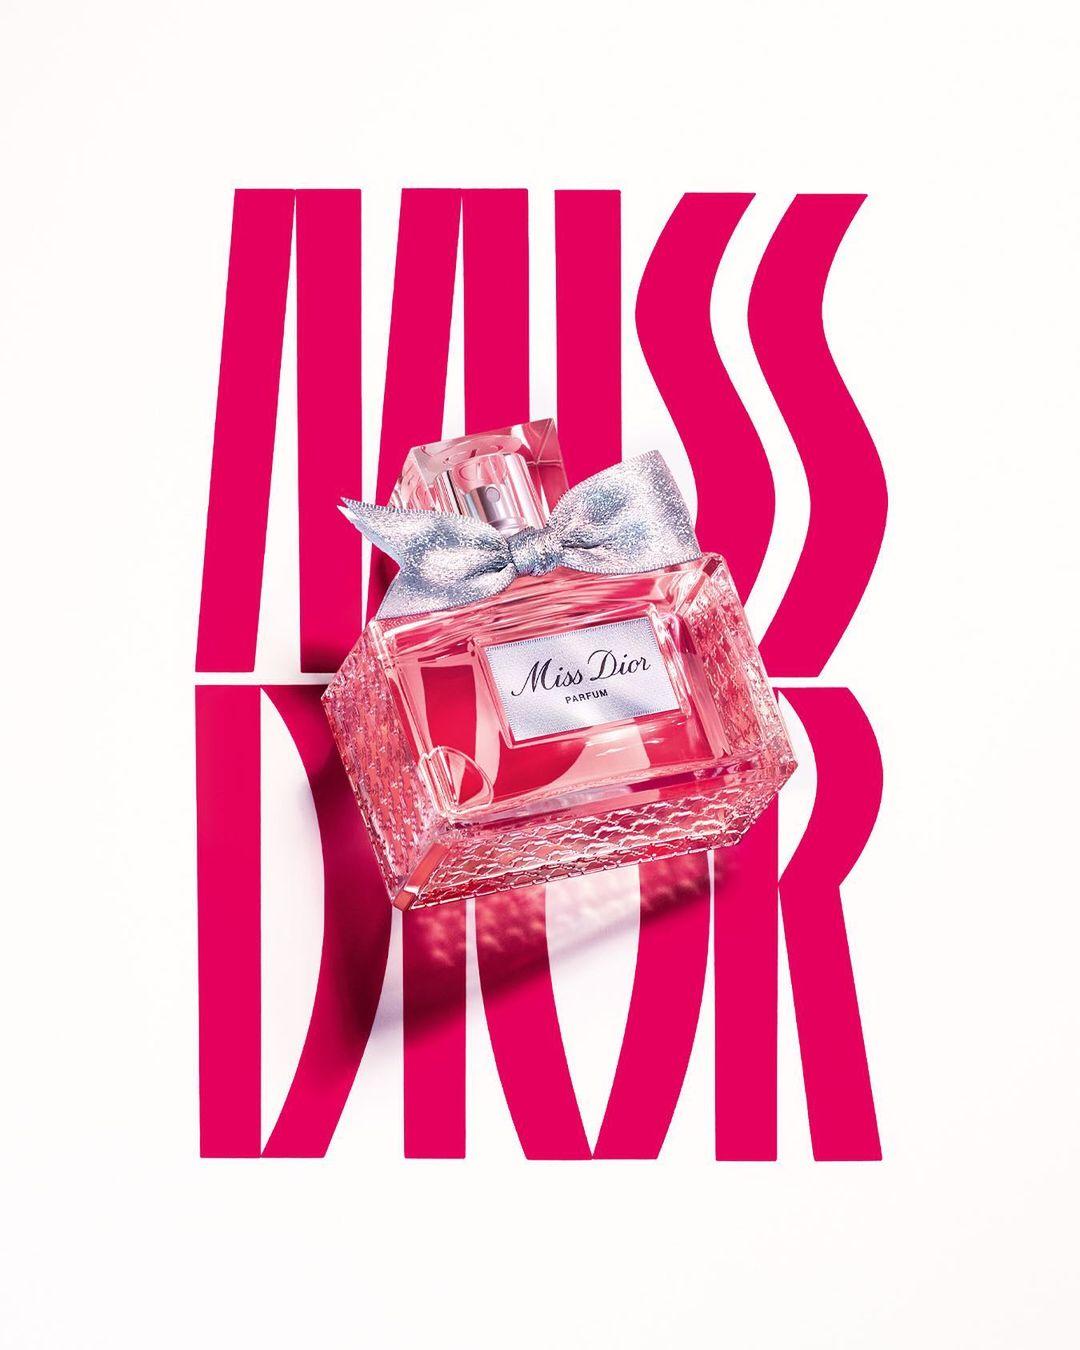 Discover the new Miss Dior Parfum as envisioned by @FrancisKurkdjian_Official, Perfume Creation Director, translating the youth of its time into an alluring trail.
An intense and luminous fragrance at the heart of which shines the essence of Miss Dior.
 
#DiorBeauty #DiorParfums #MissDior #MissDiorParfum #LoveOutLoud